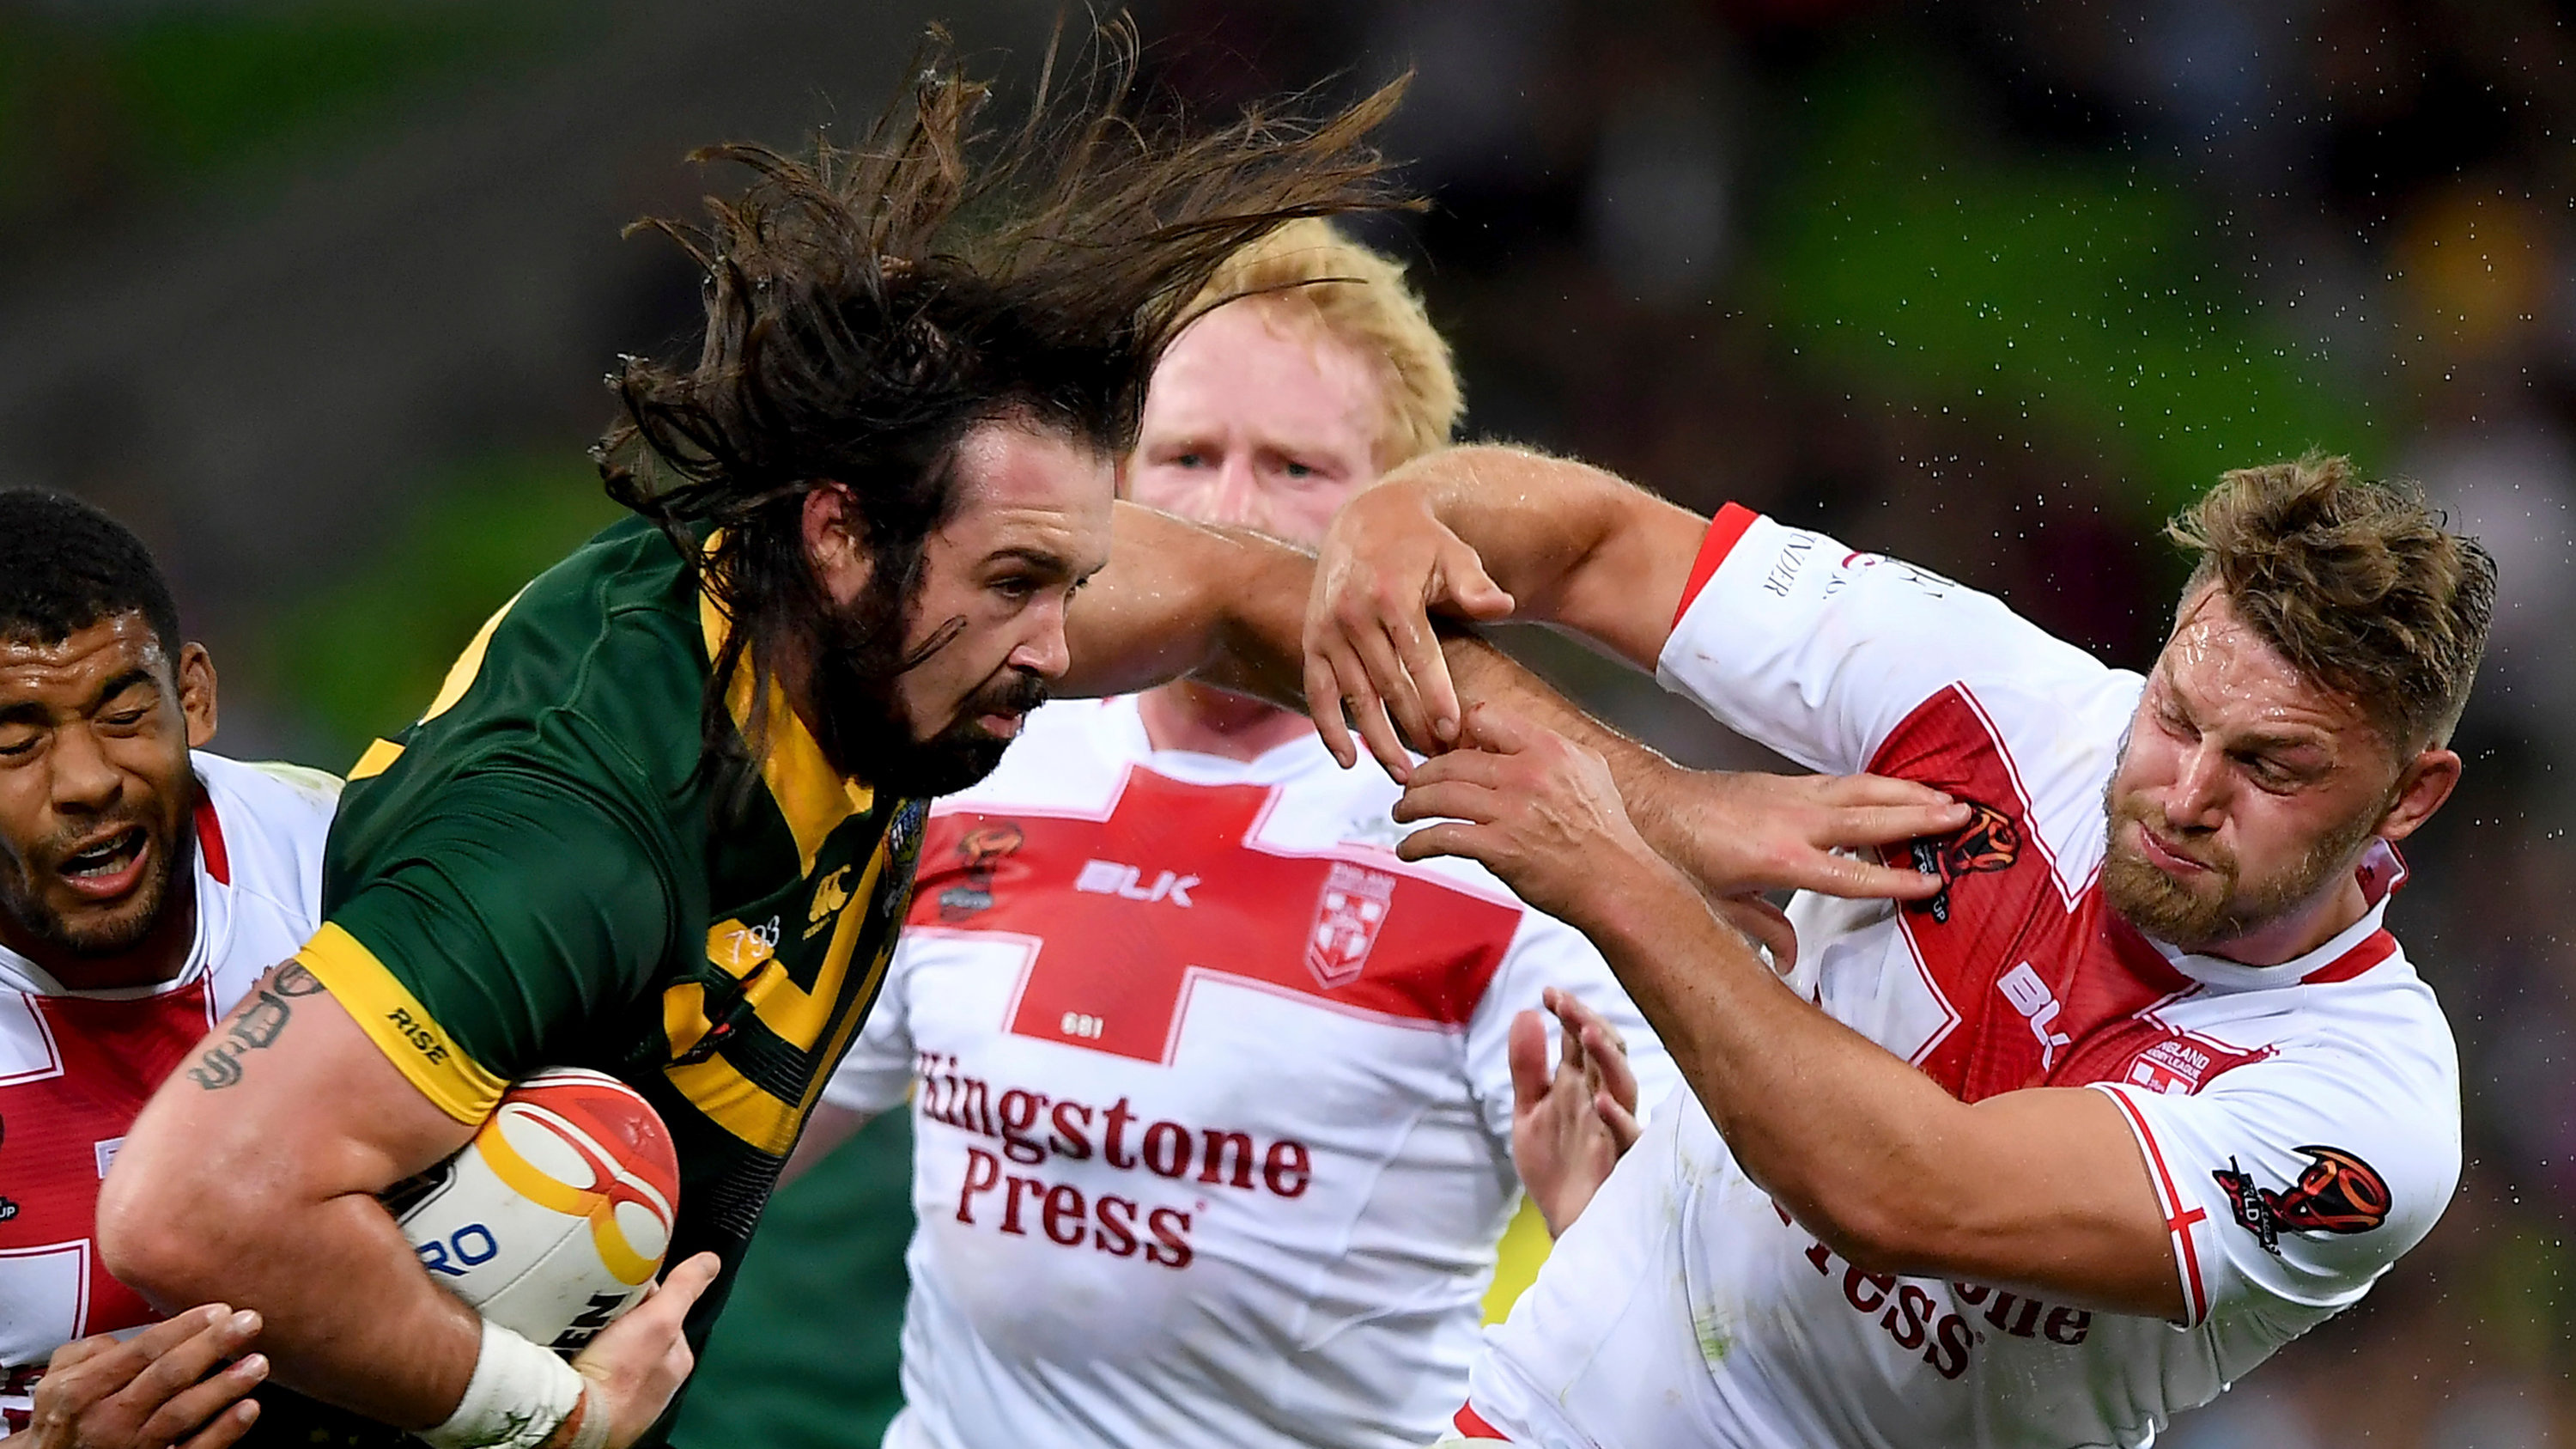 Rugby League: Australia’s Aaron Woods fends off England’s Elliott Whitehead during the World Cup game in Melbourne, Australia. 3000x1690 HD Wallpaper.